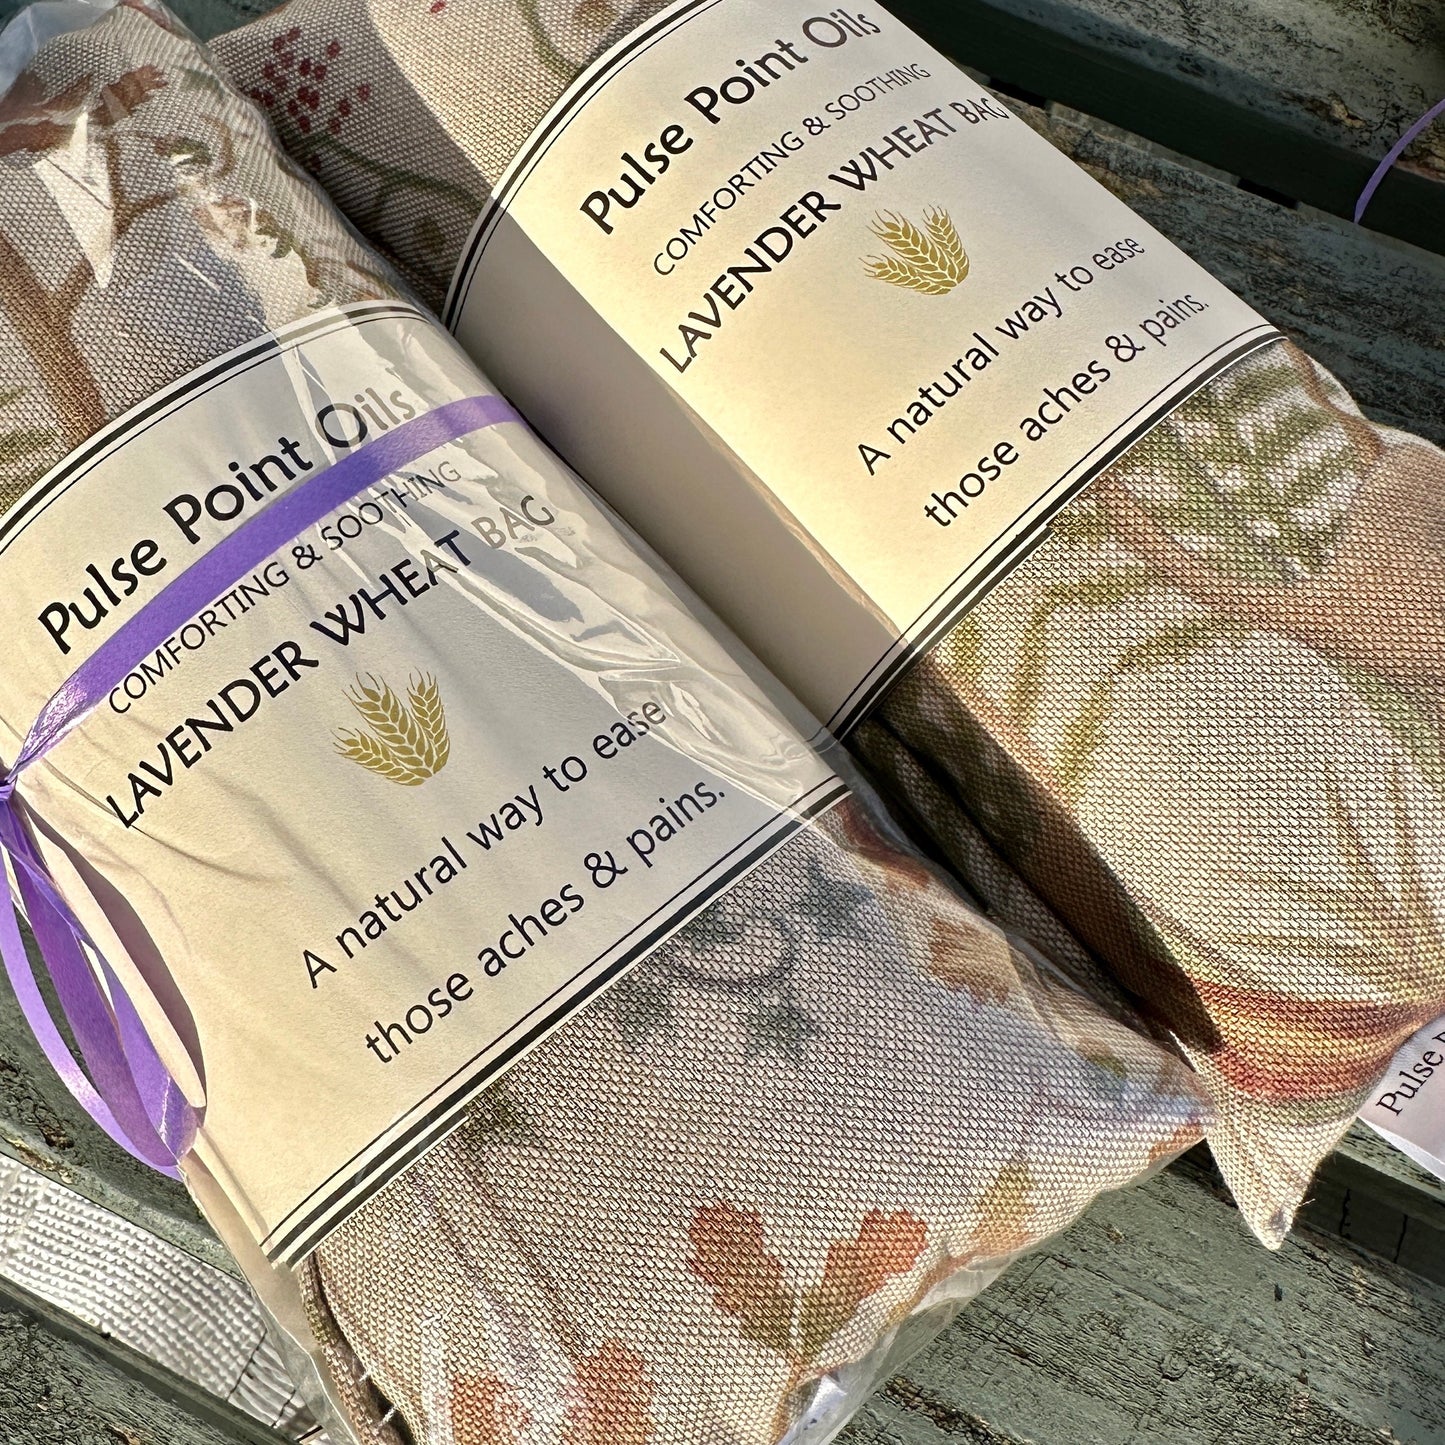 wheat bags for back pain, warming with relaxing lavender. Woodland print heat pad